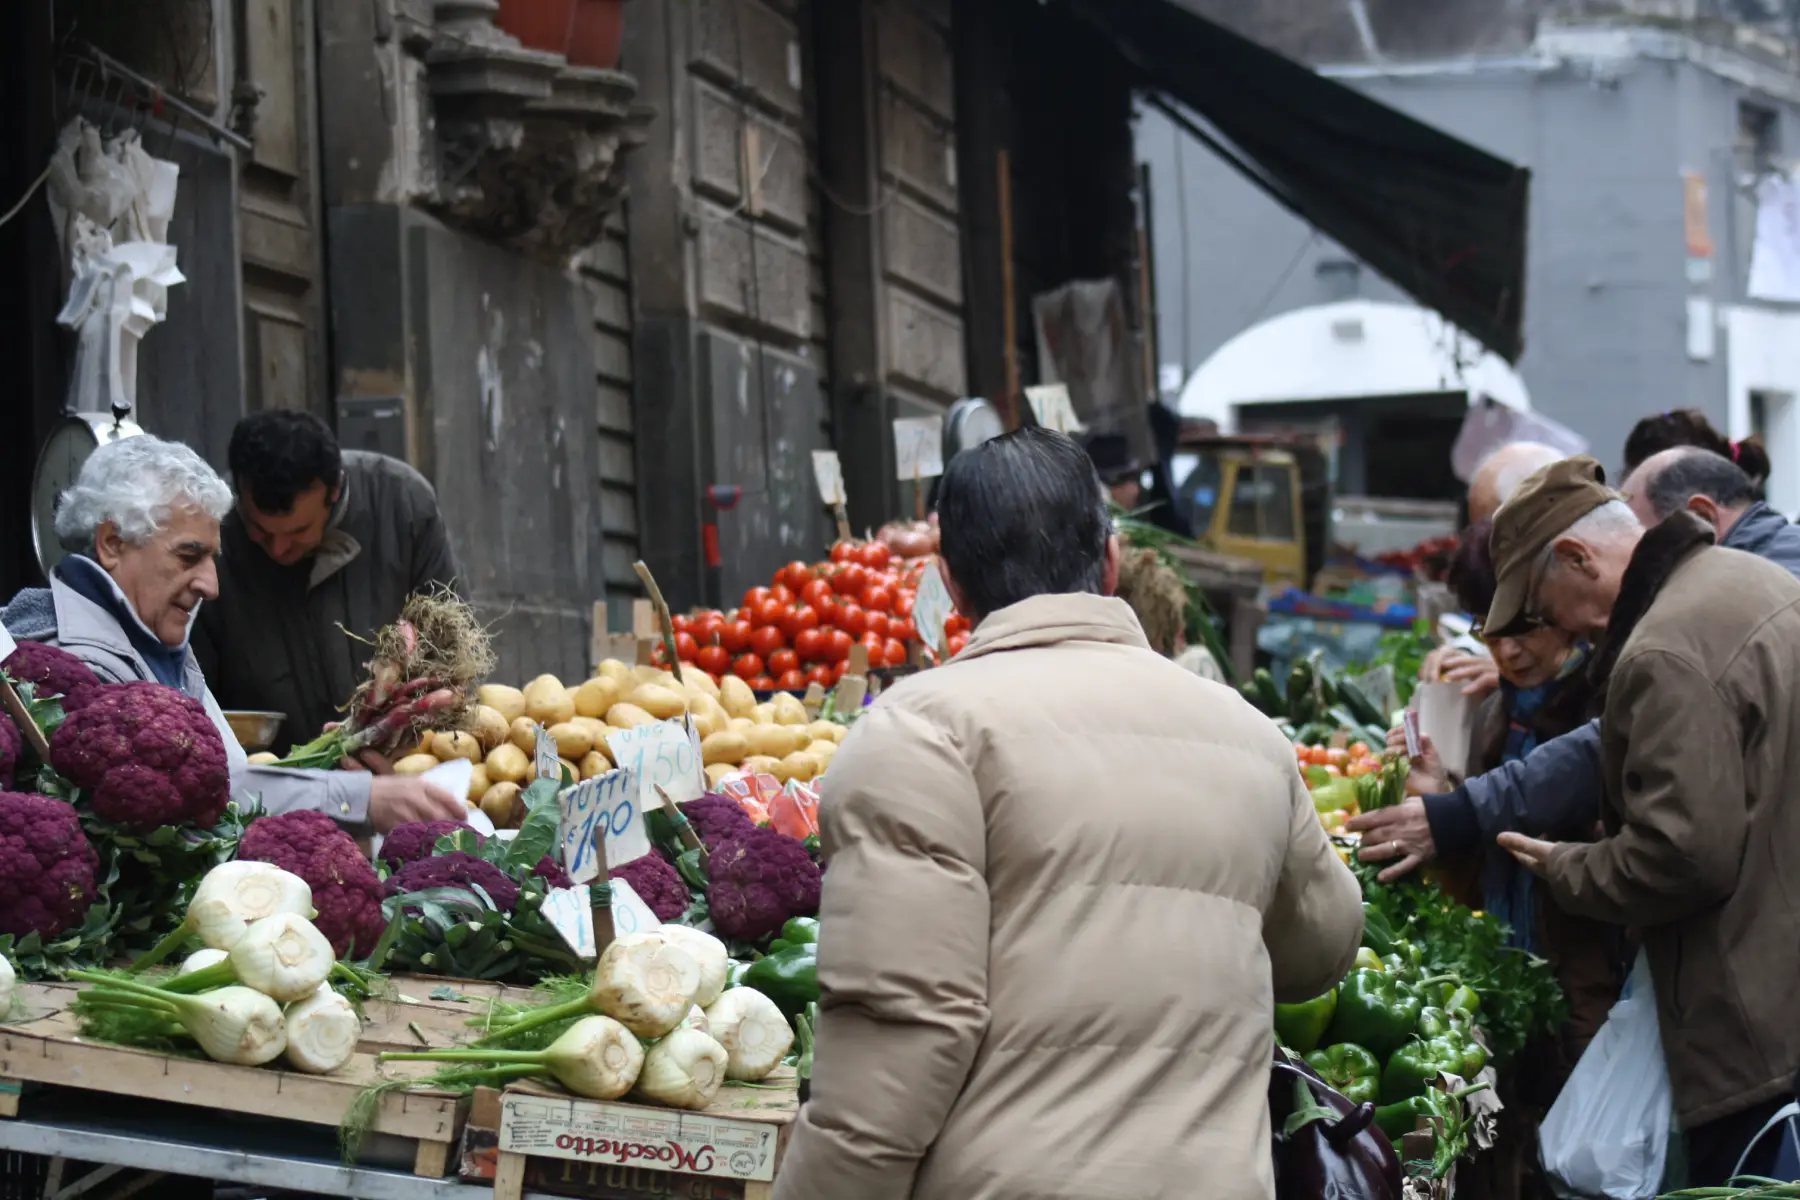 Customers buying their vegetables from an outdoor market in Catania